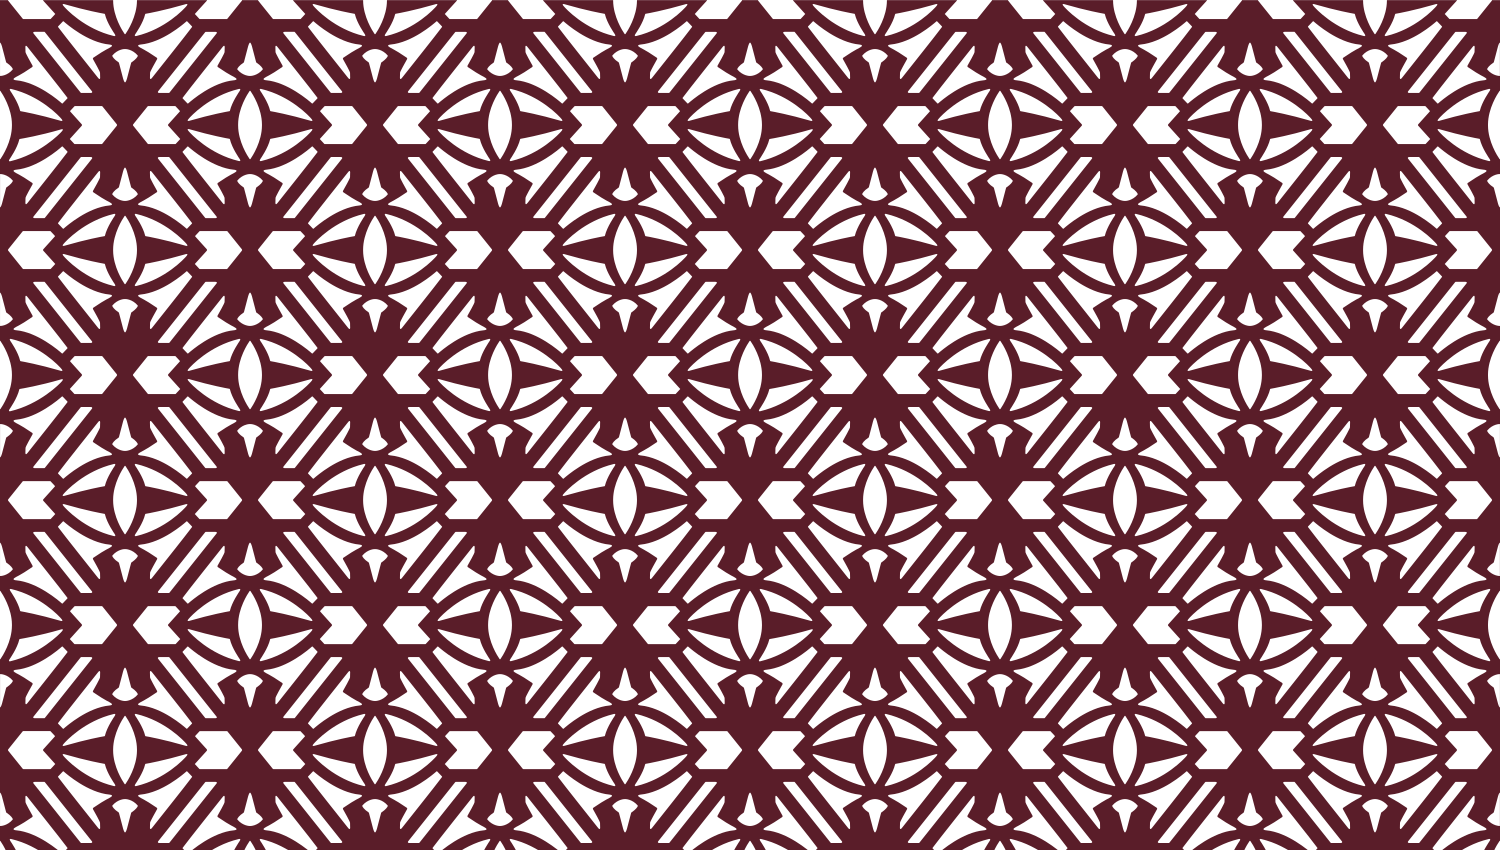 Parasoleil™ Horus © pattern displayed with a burgundy color overlay